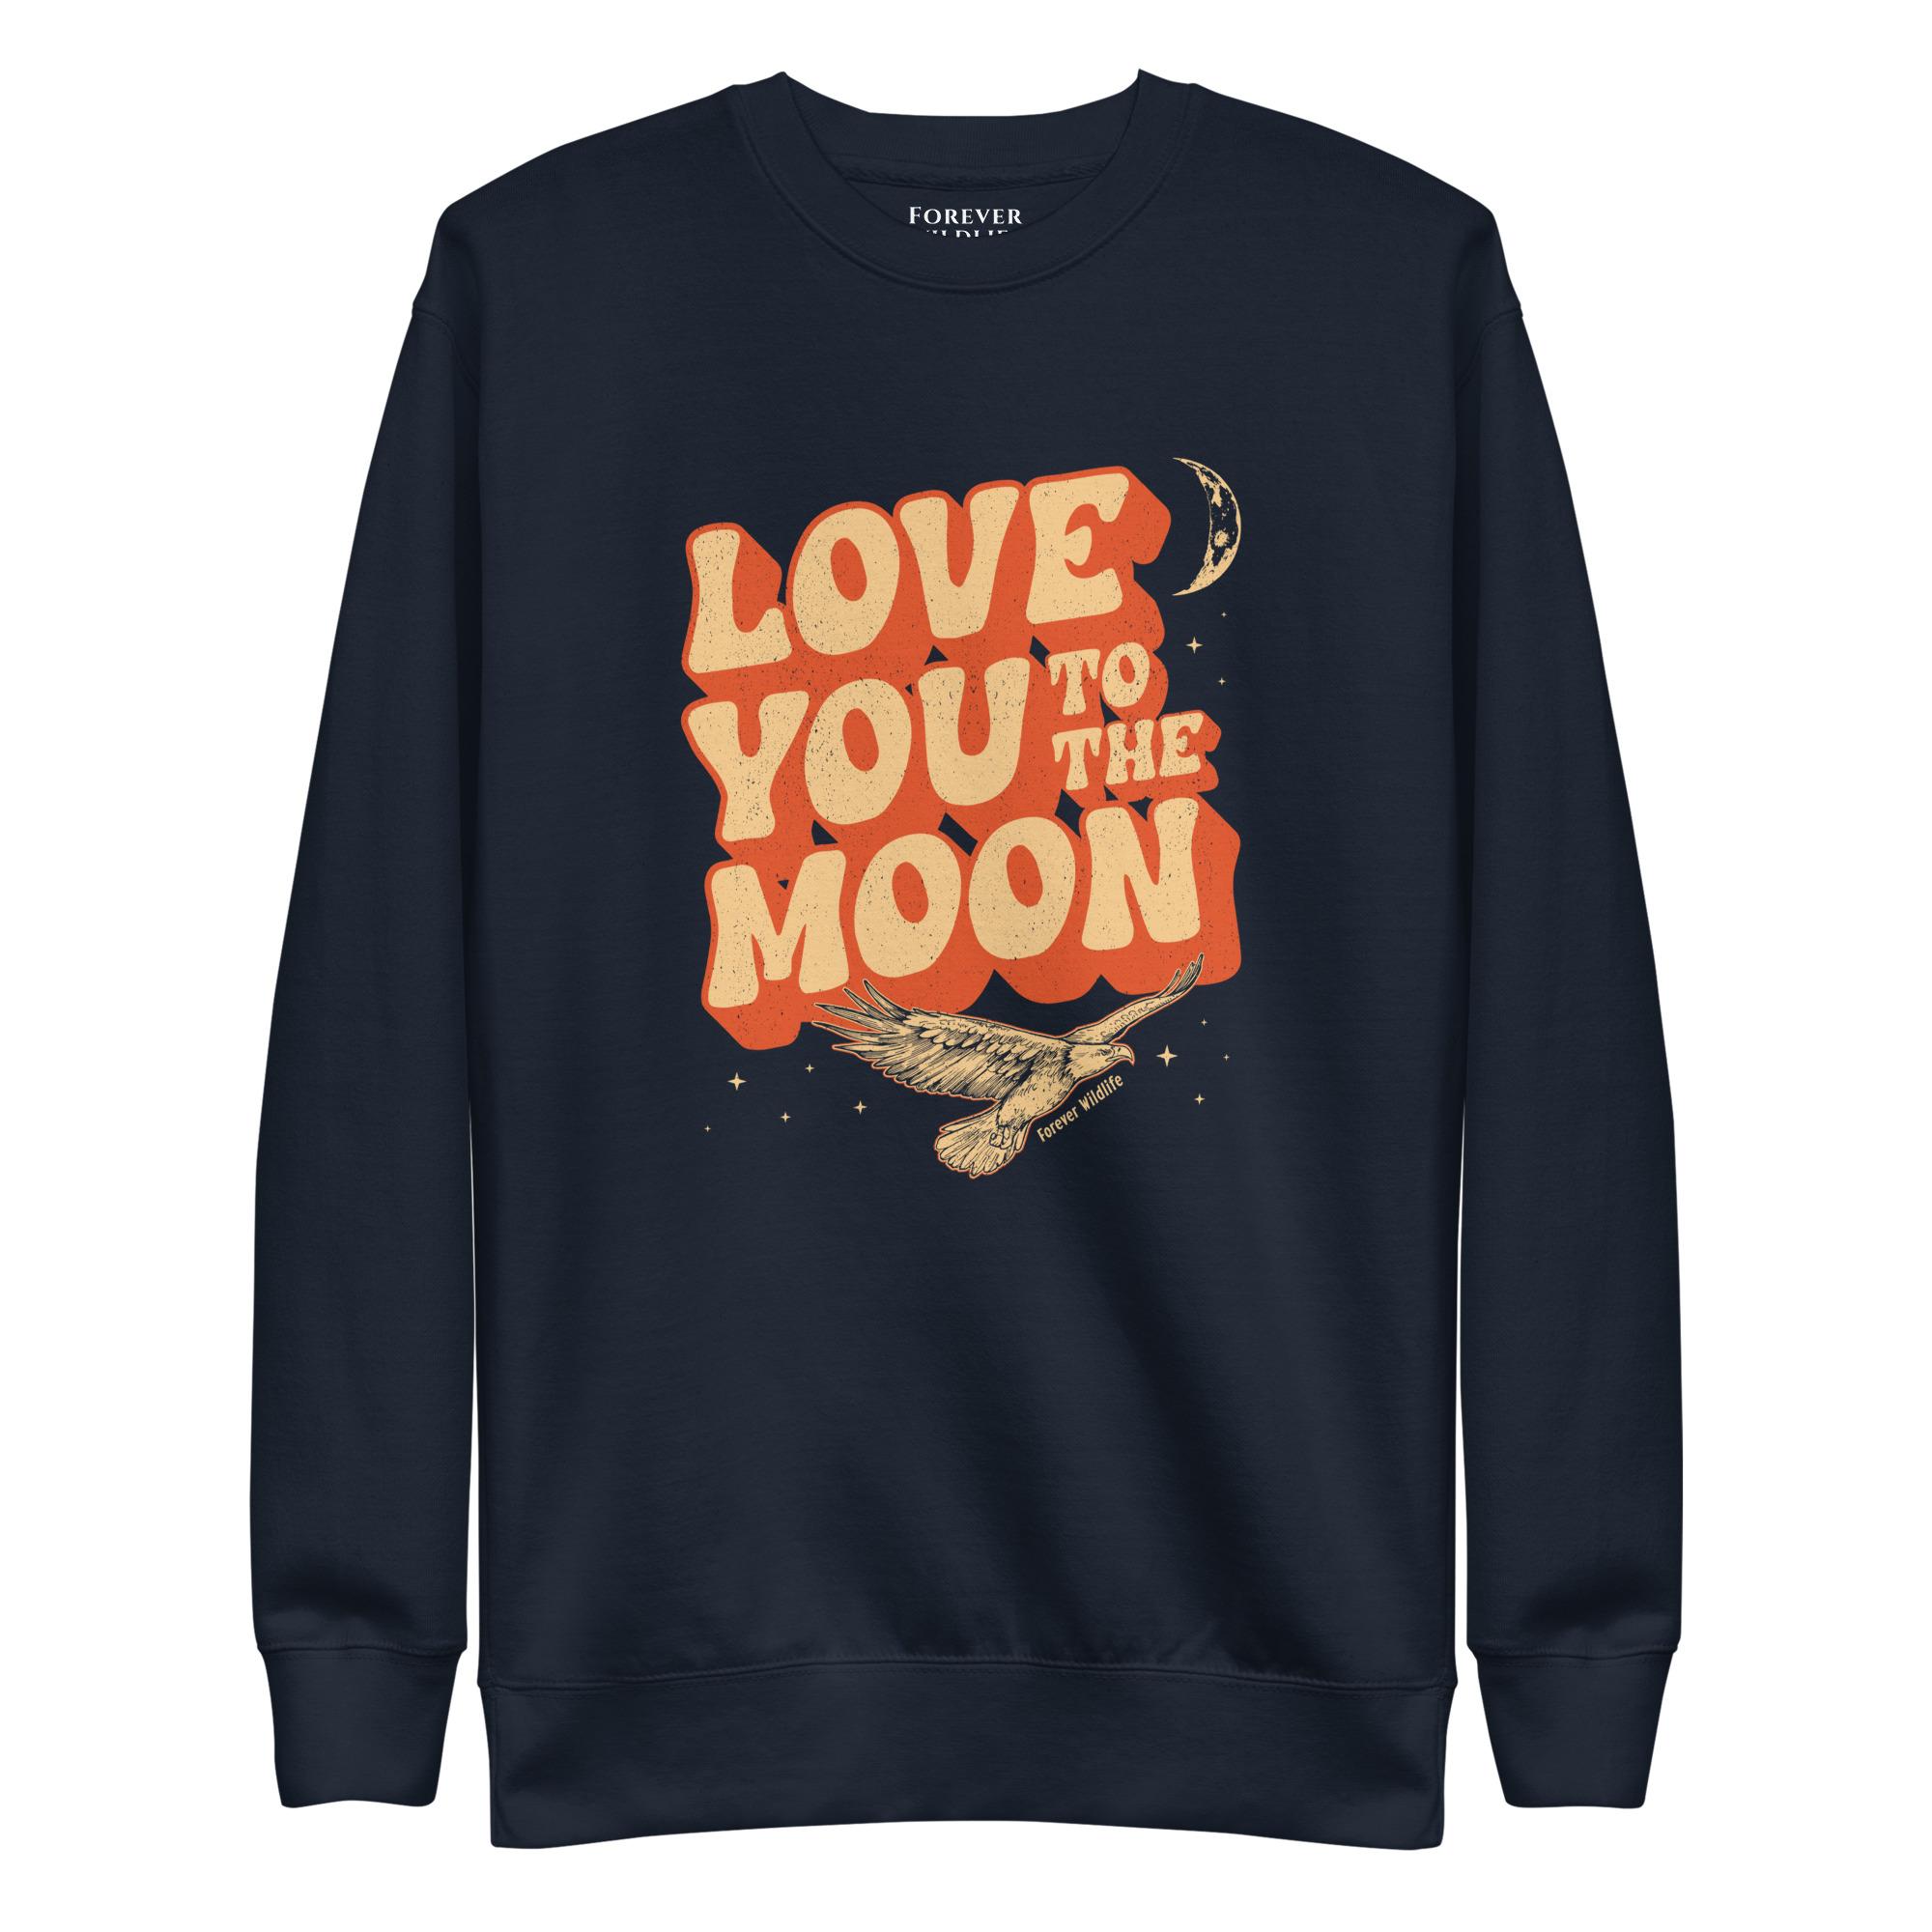  Eagle Sweatshirt in Navy-Premium Wildlife Animal Inspiration Sweatshirt Design with 'Love You To The Moon' text, part of Wildlife Sweatshirts & Clothing from Forever Wildlife.